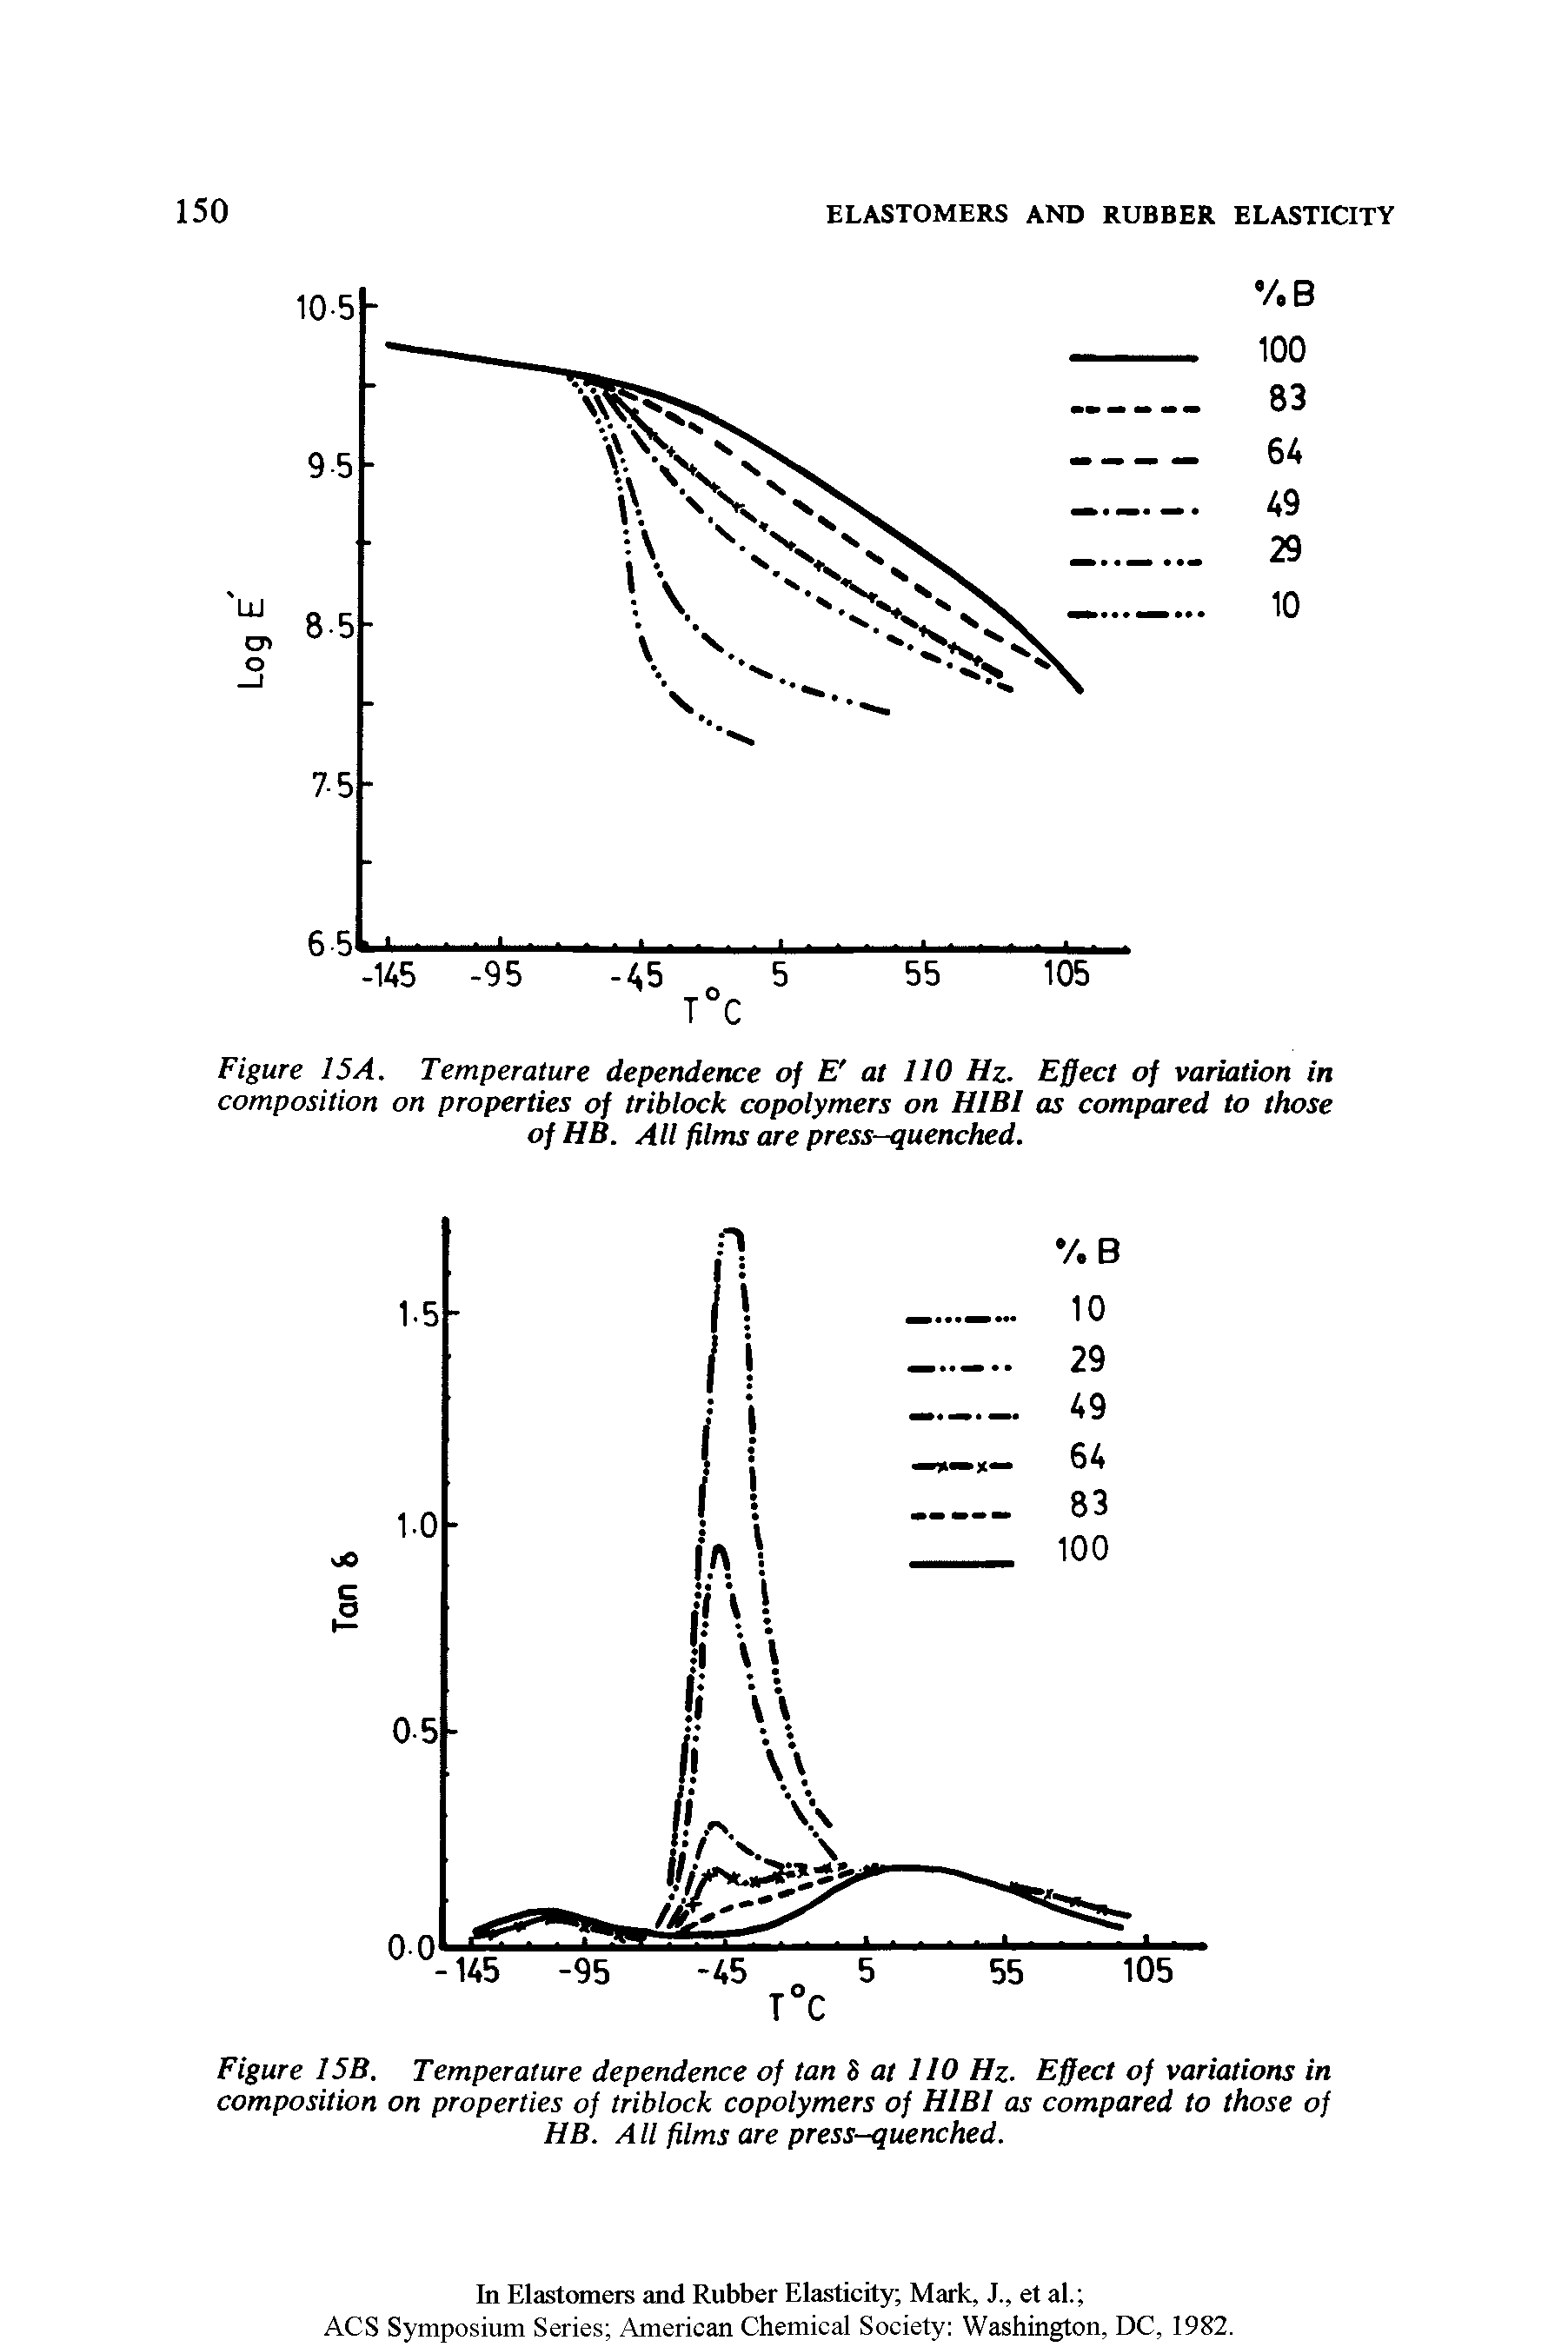 Figure 15A. Temperature dependence of E at 110 Hz. Effect of variation in composition on properties of triblock copolymers on H1B1 as compared to those of HB. All films are press-quenched.